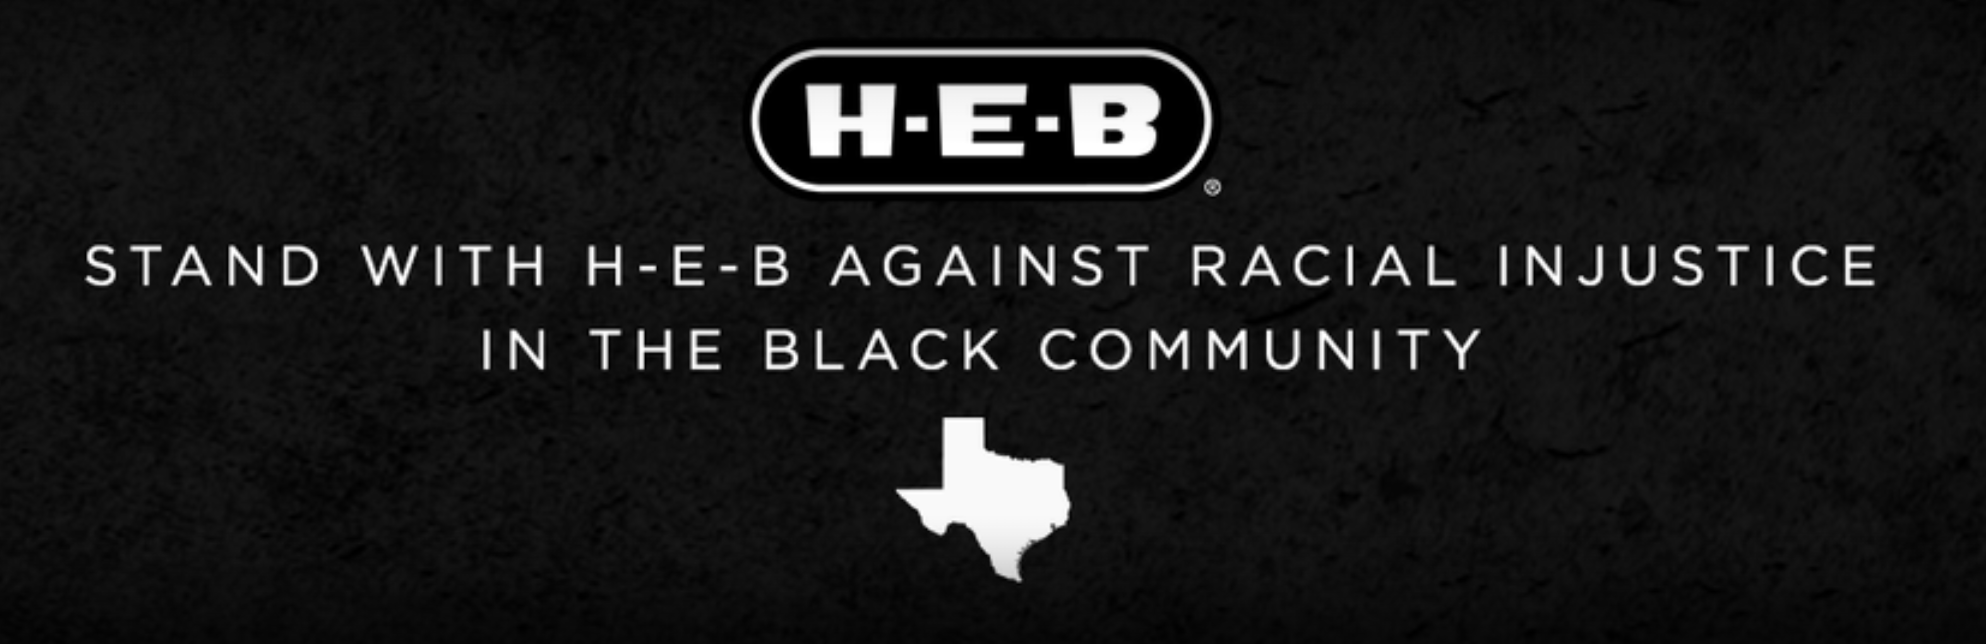 H-E-B racial injustice fund.png